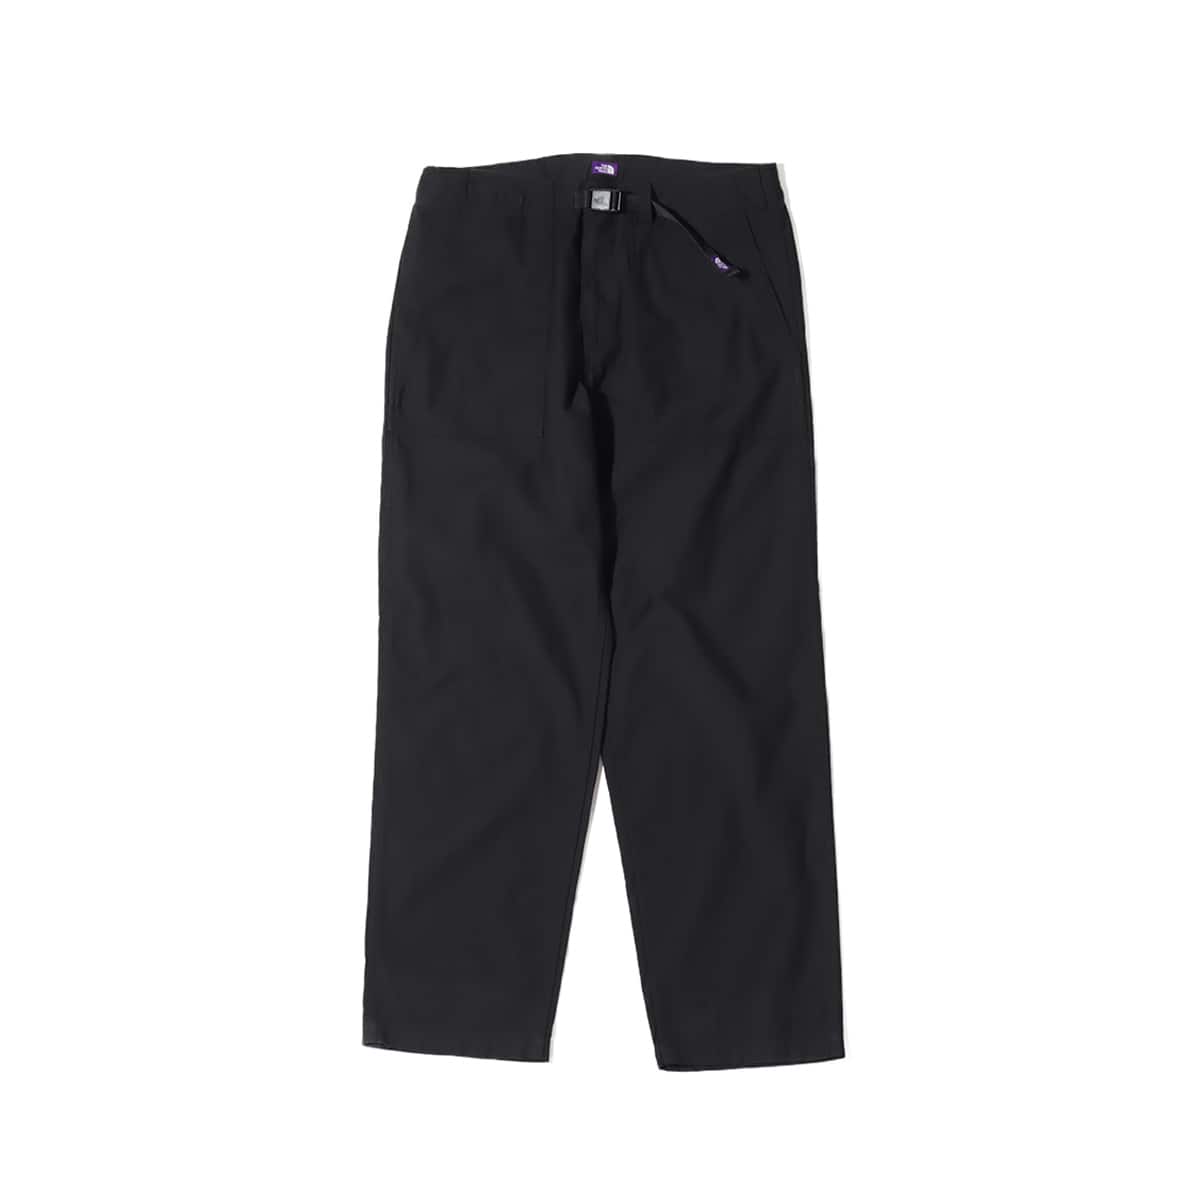 THE NORTH FACE PURPLE LABEL Field Baker Pants Black 23FW-I_photo_large